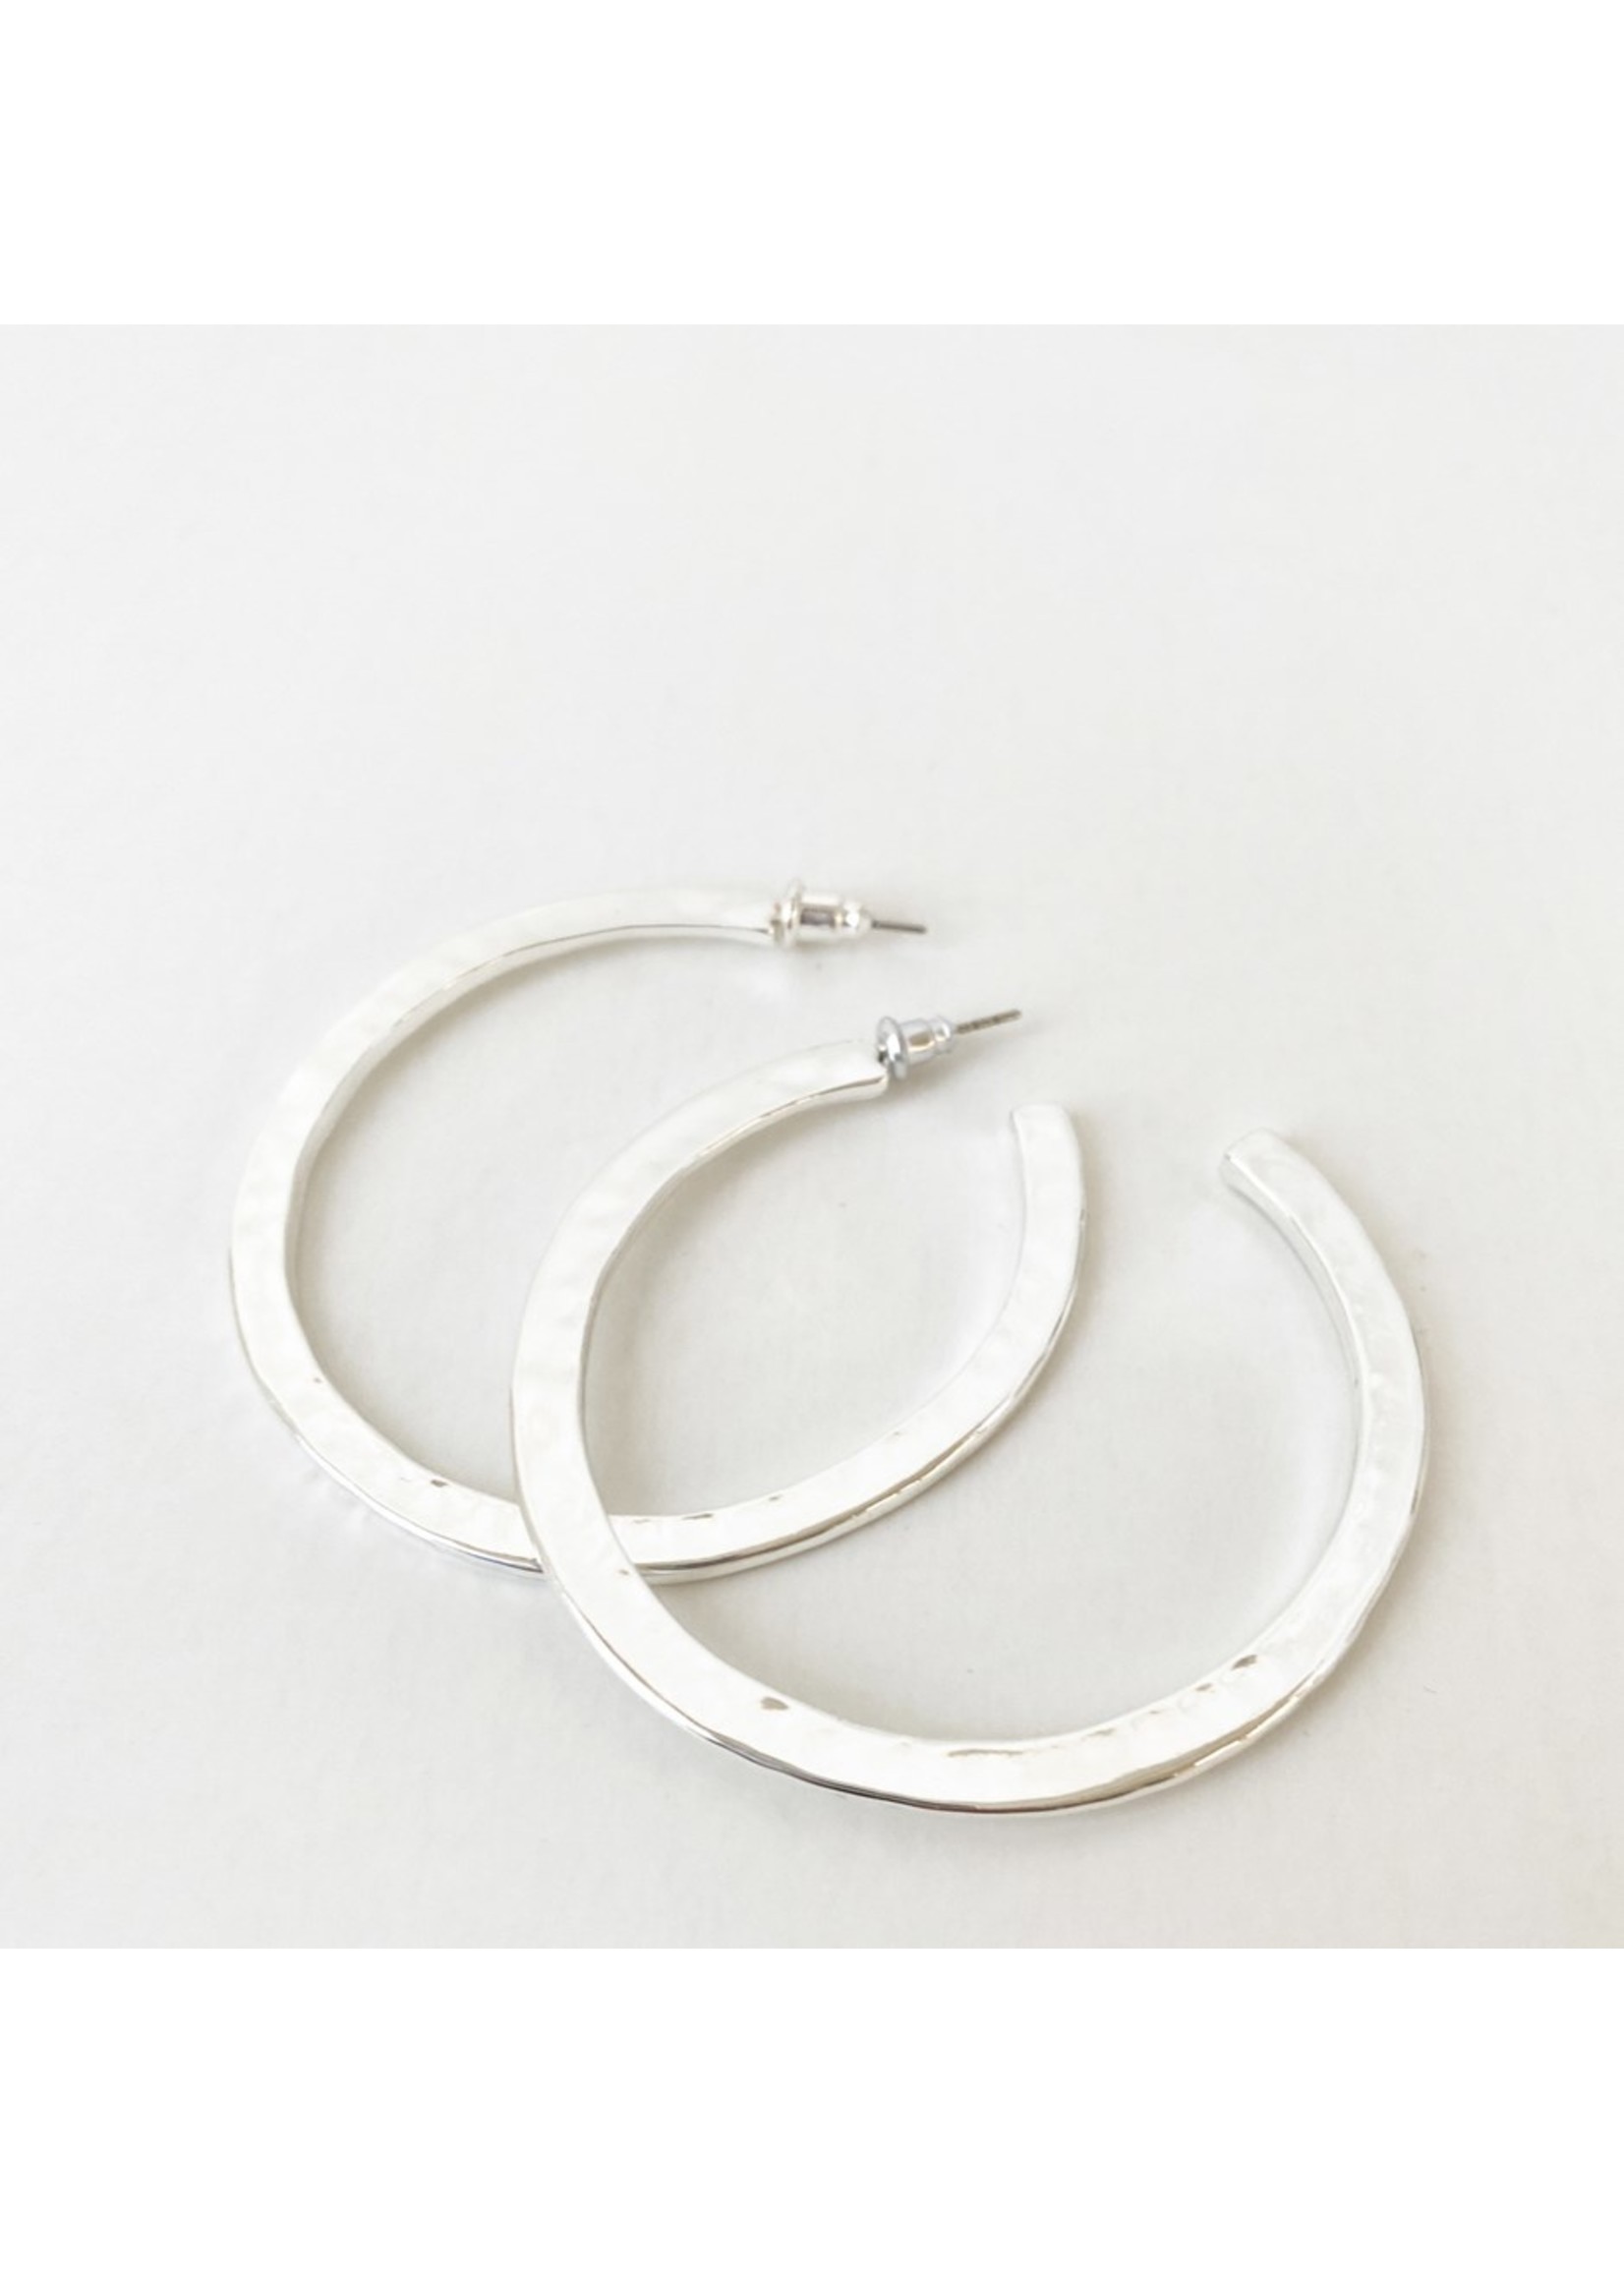 Caracol Flat Hammered Hoops